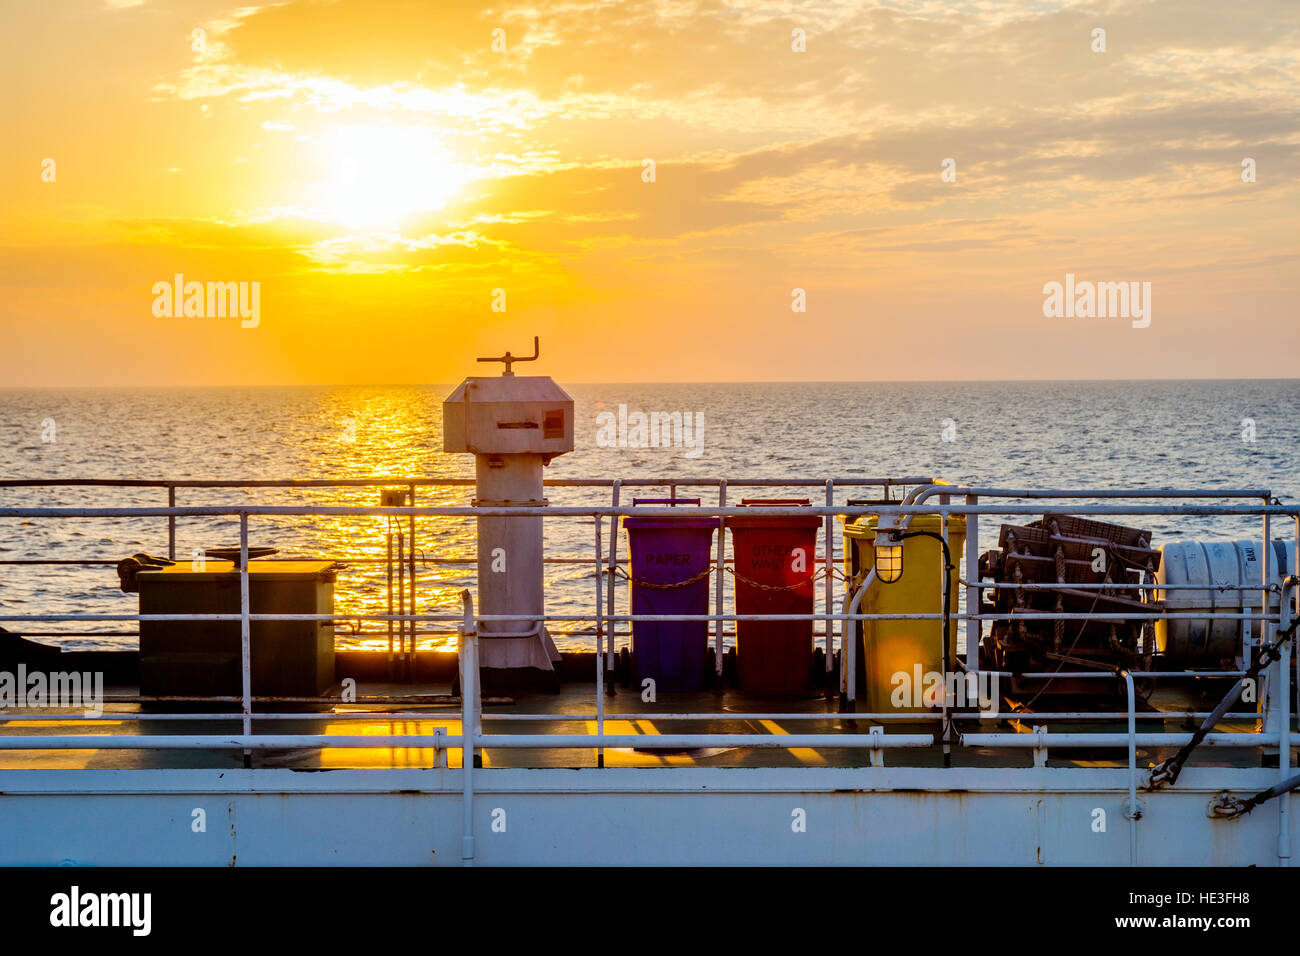 Trash container on the cargo vessel ship at the sea Stock Photo